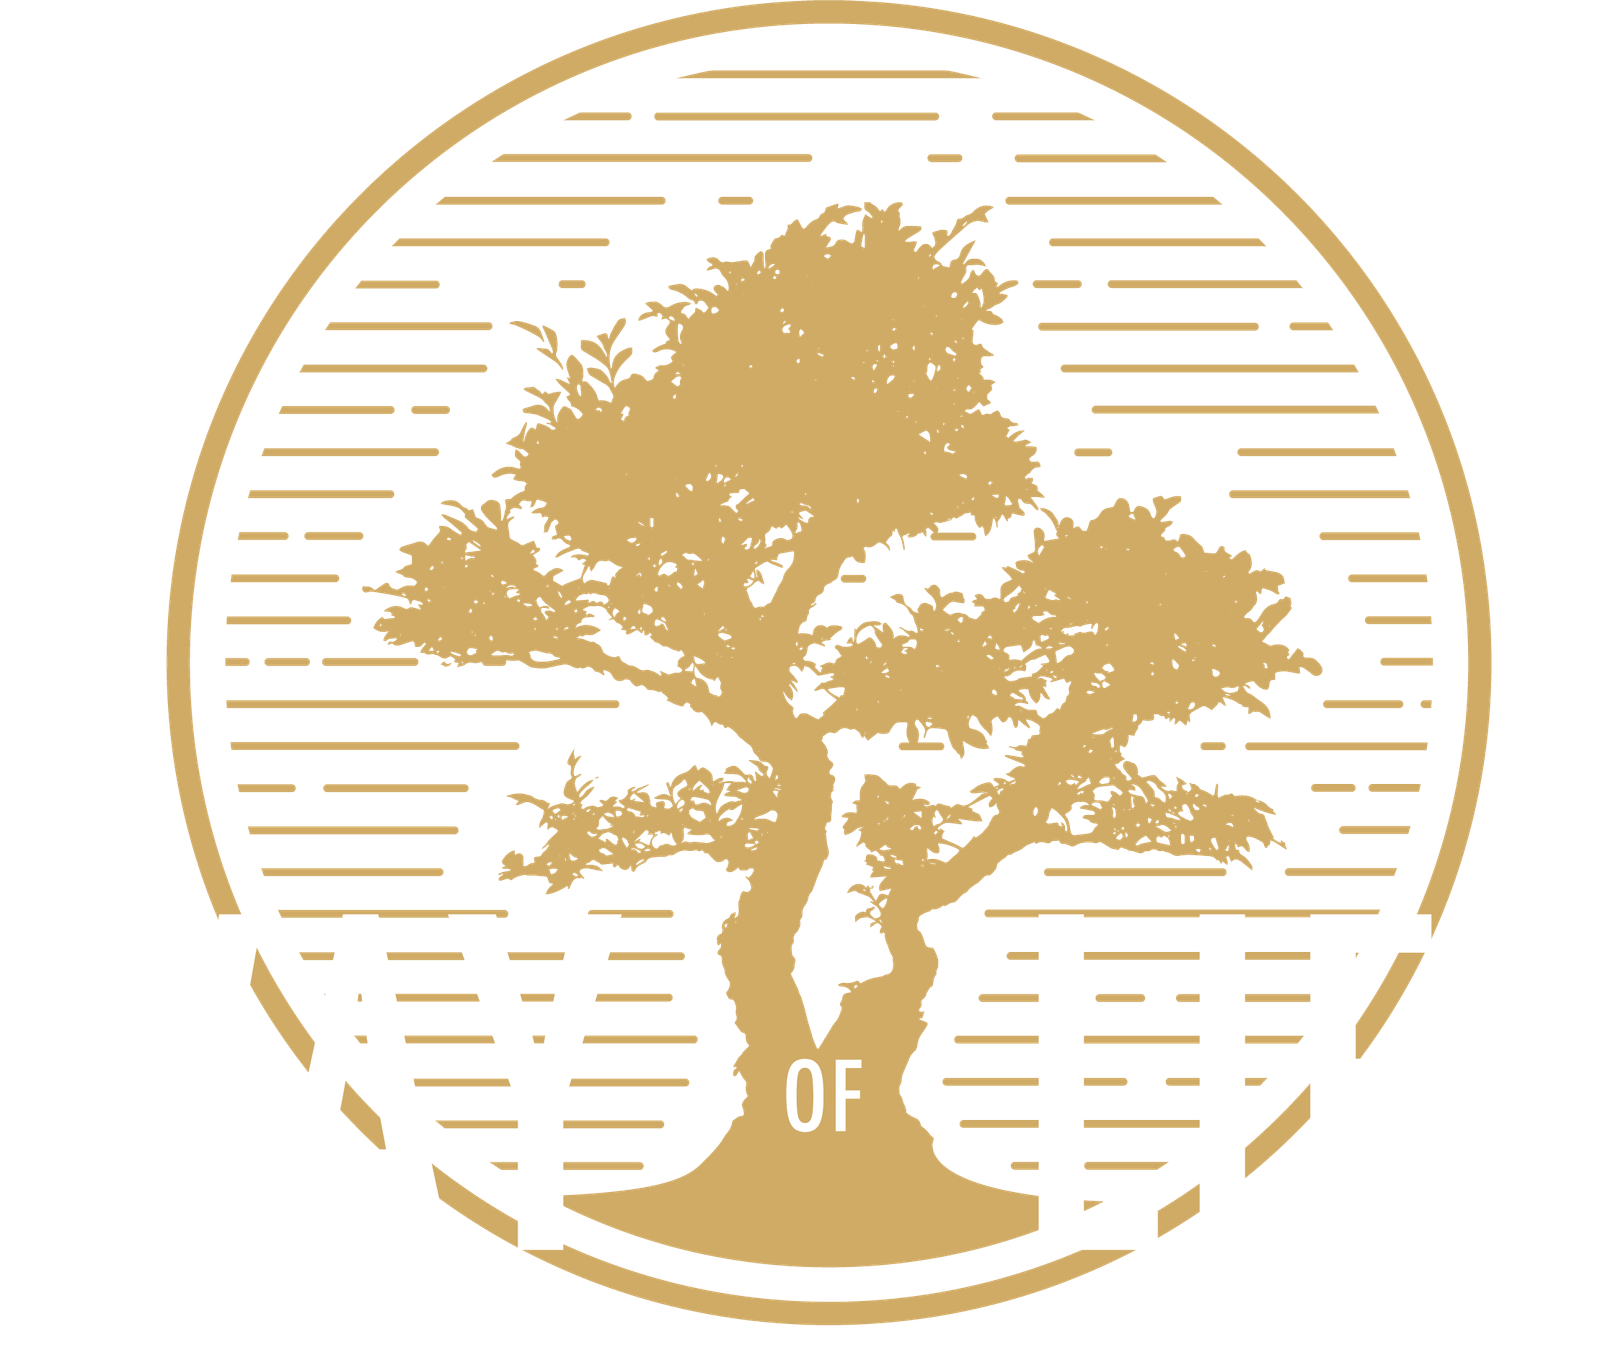 Way of Life Bonsai Ltd logo showing the silhouette of premium bonsai tree for sale UK with the company name, Way of Life Bonsai Ltd overlaid